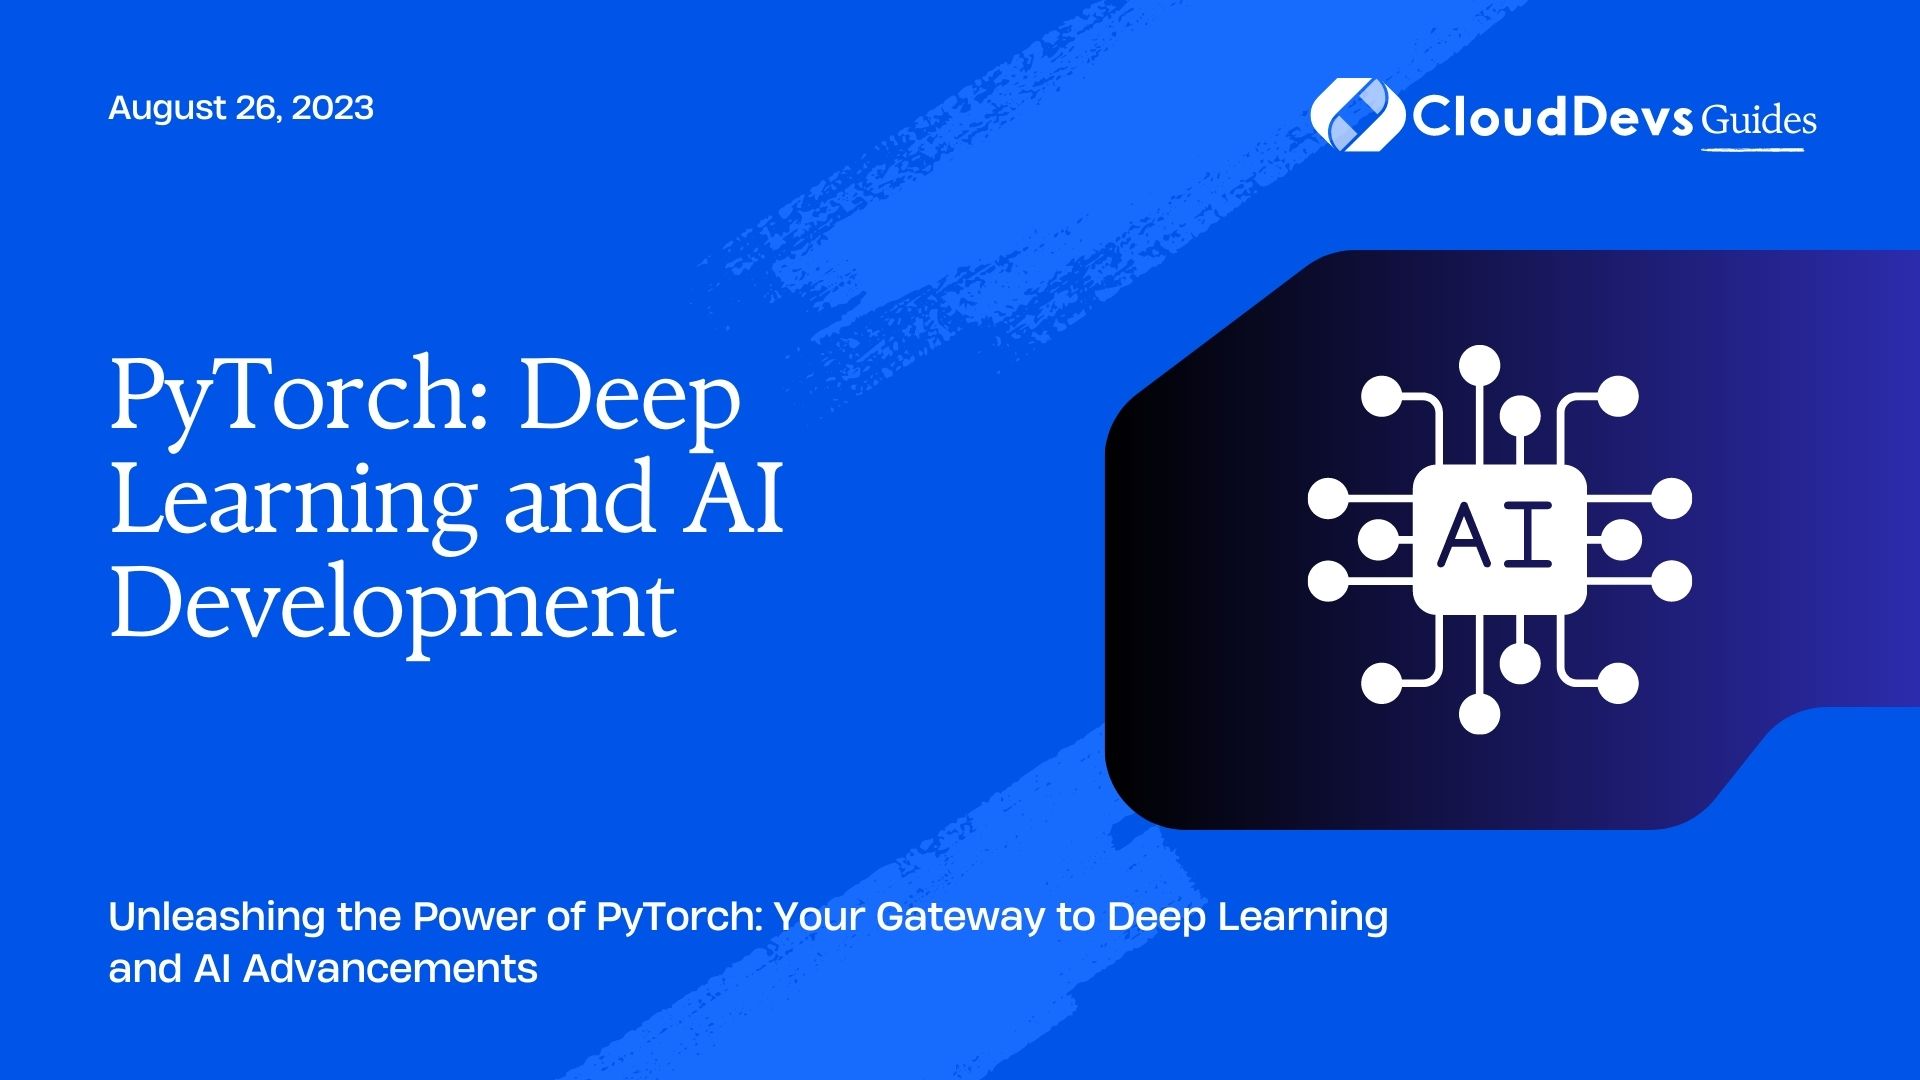 PyTorch: Deep Learning and AI Development